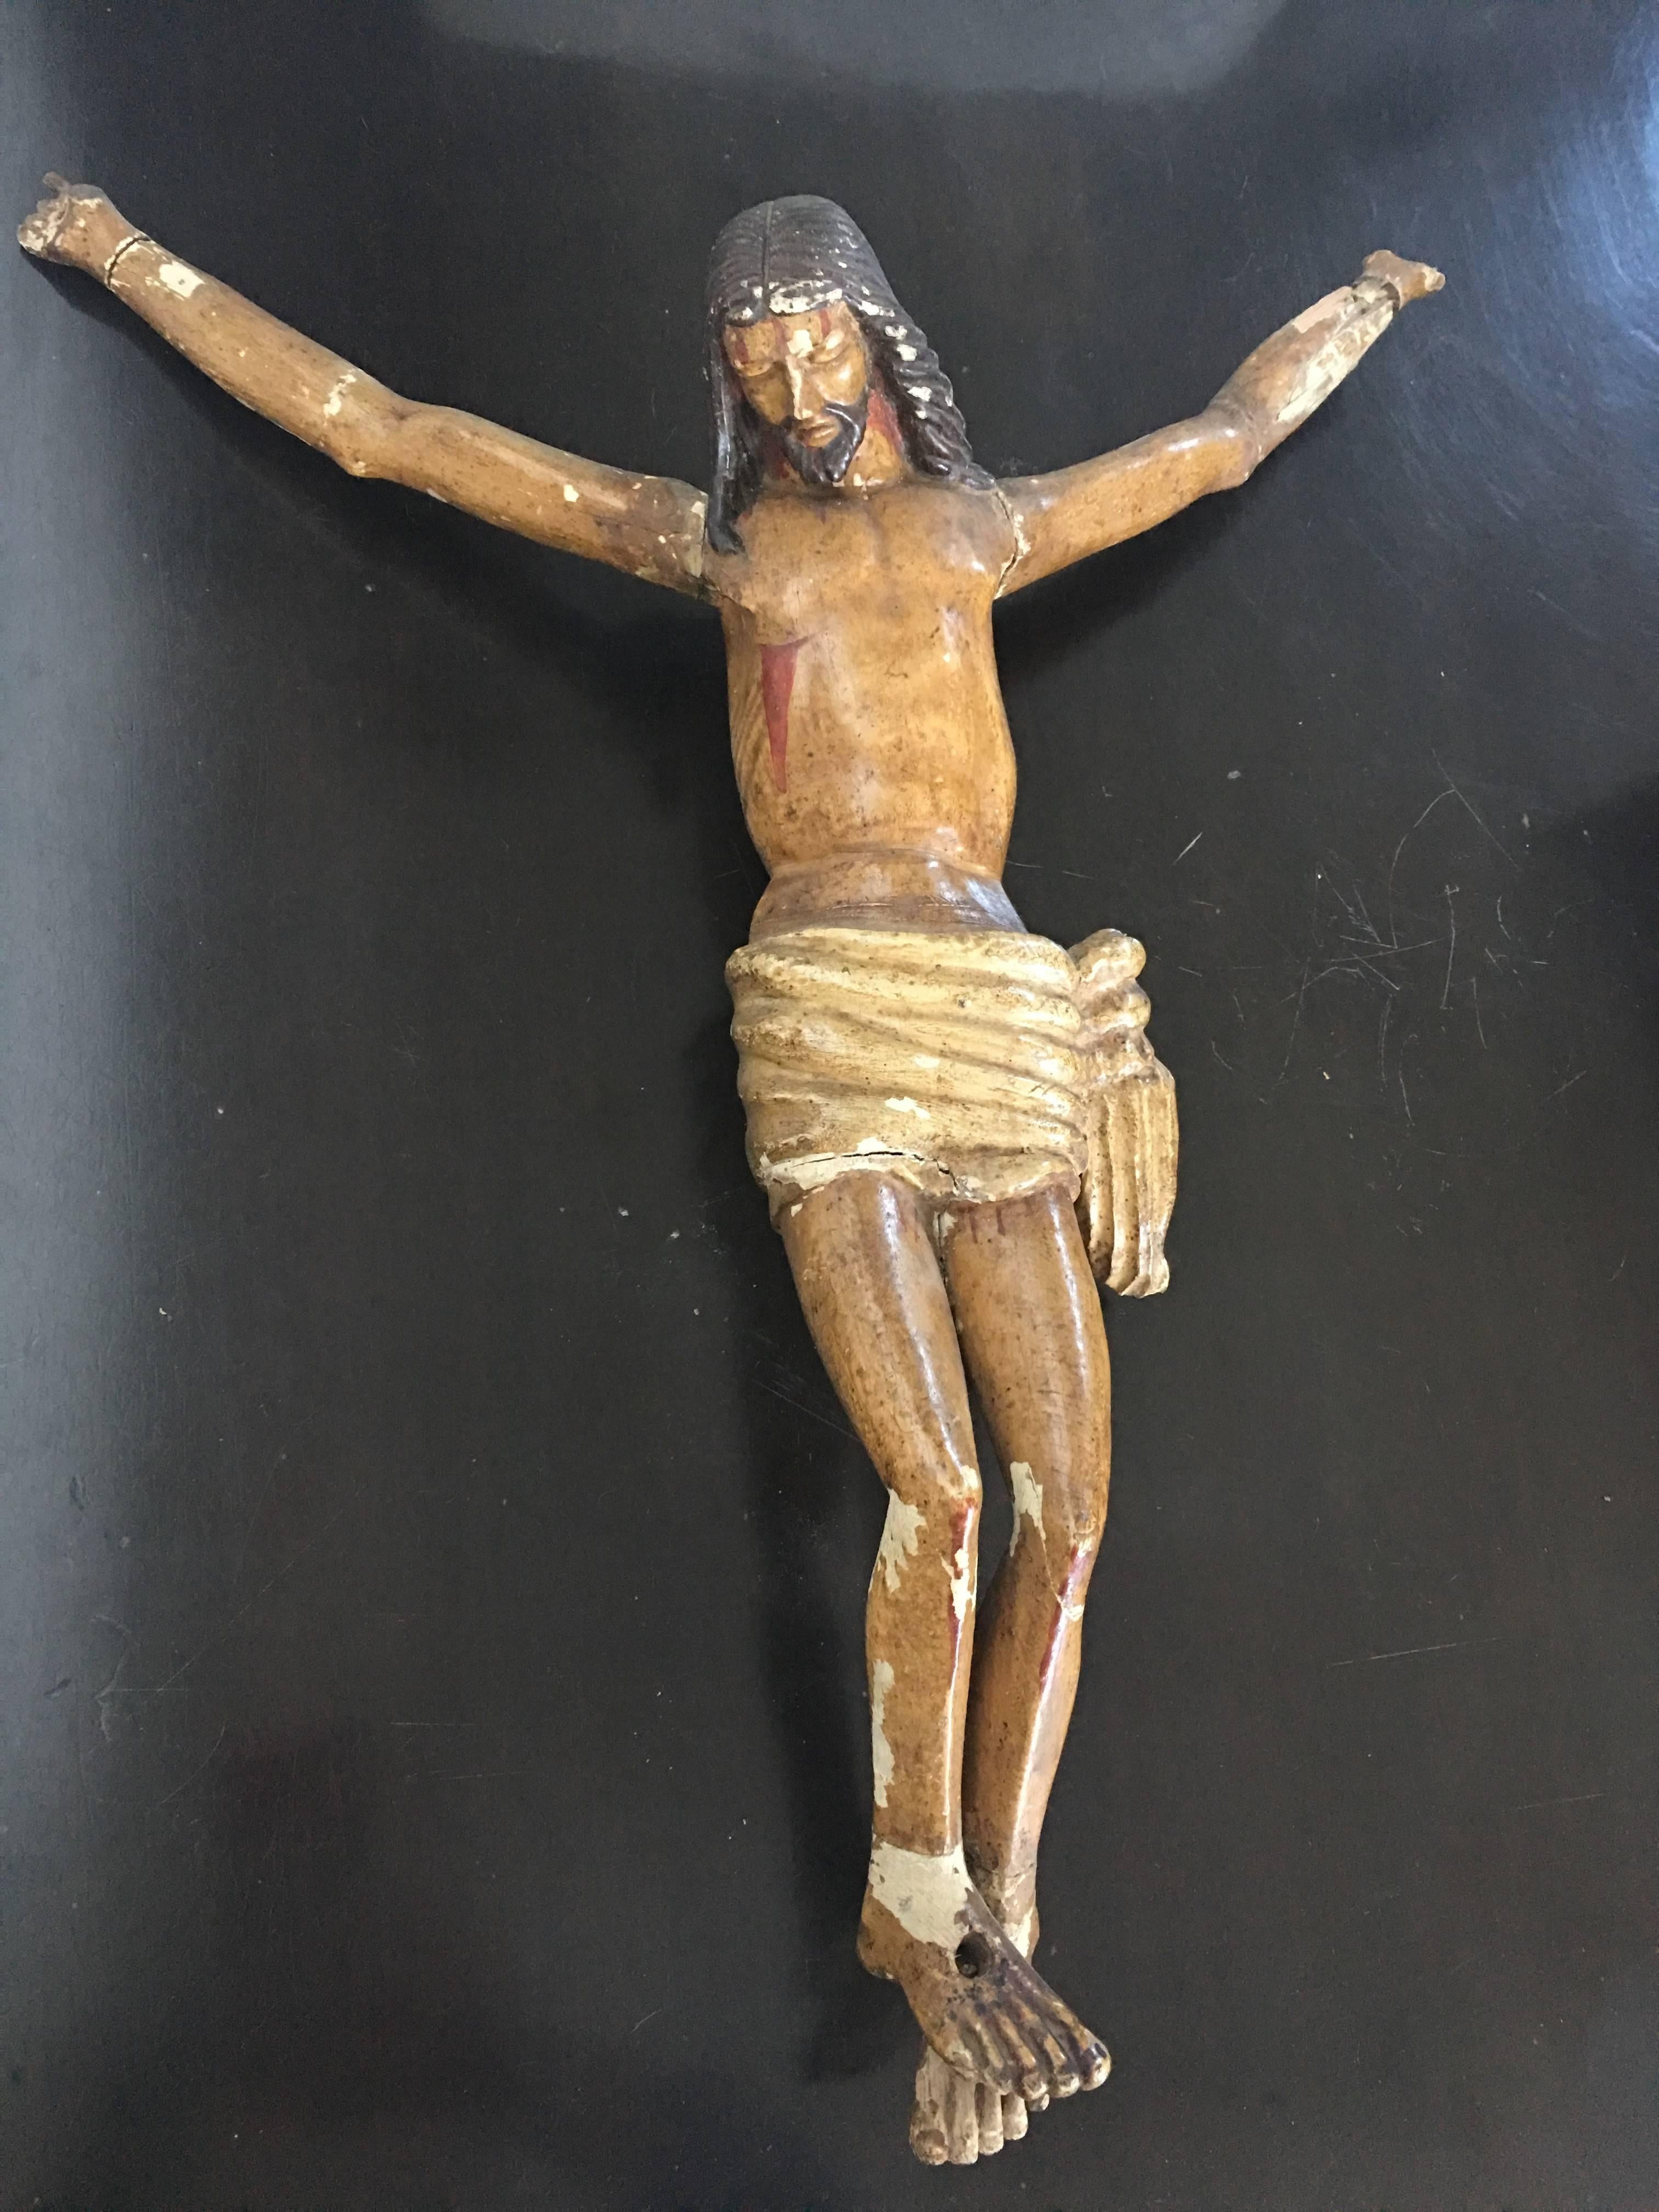 Carved wooden representing Christ on the cross.